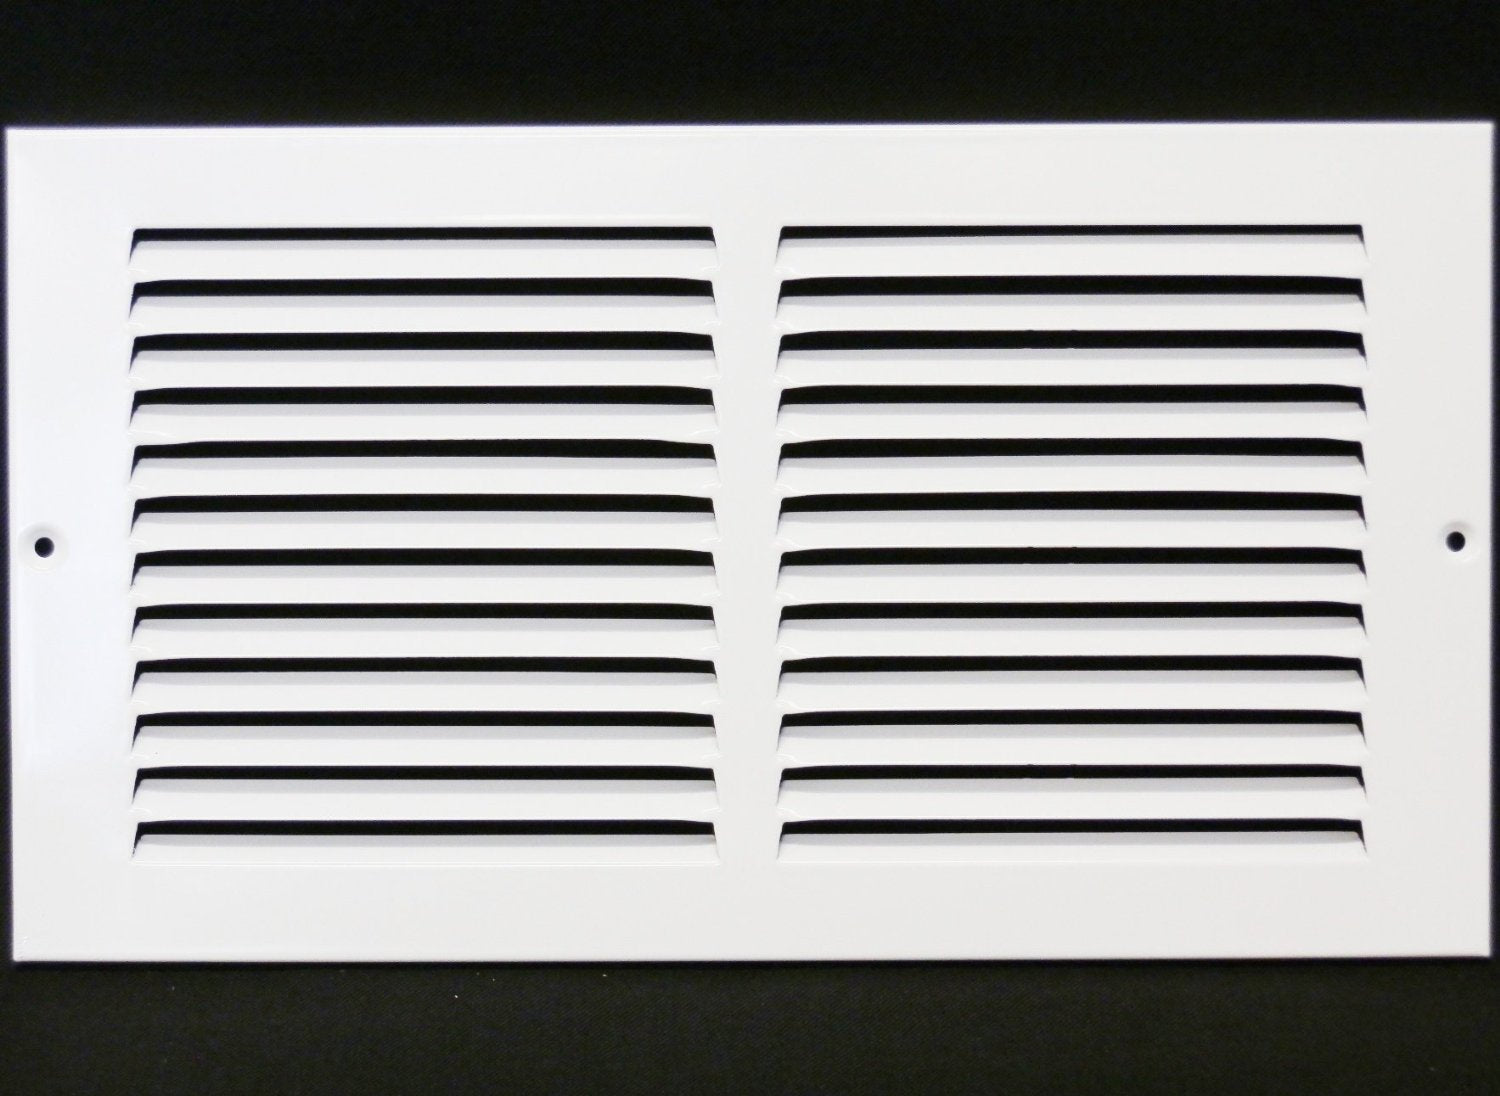 10" X 8" Air Vent Return Grilles - Sidewall and Ceiling - Steel